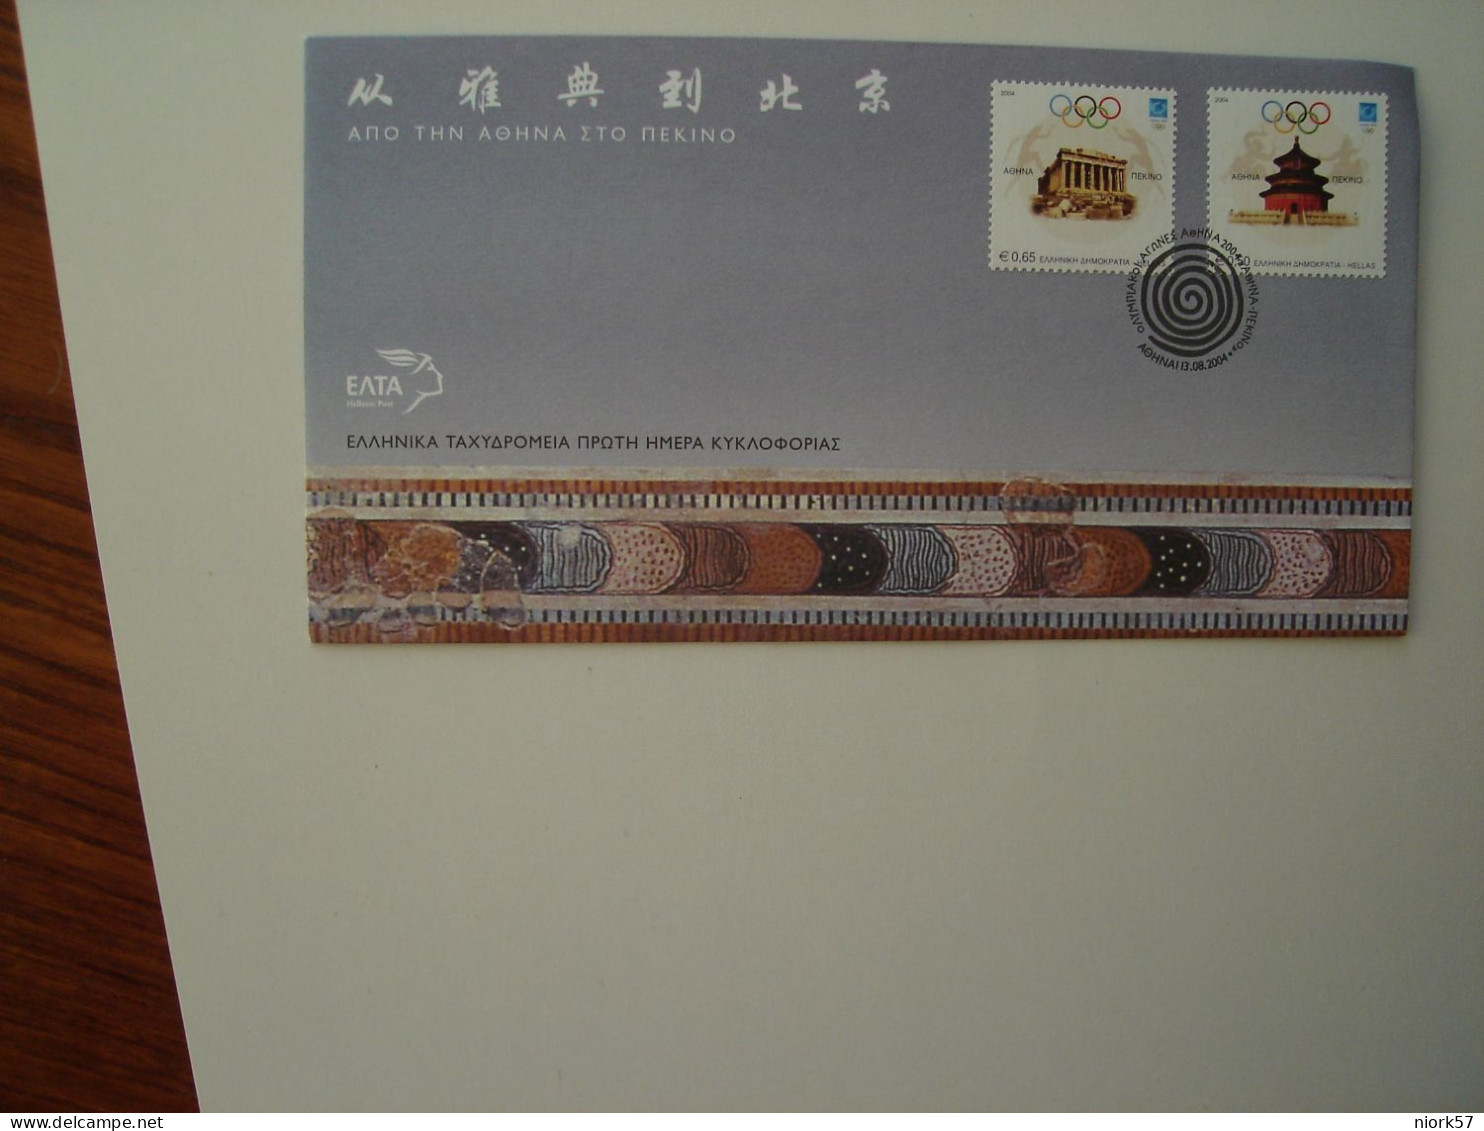 GREECE FDC 2004 OLYMPIC GAMES 2004 ATHENS BEIJING - Zomer 2004: Athene - Paralympics